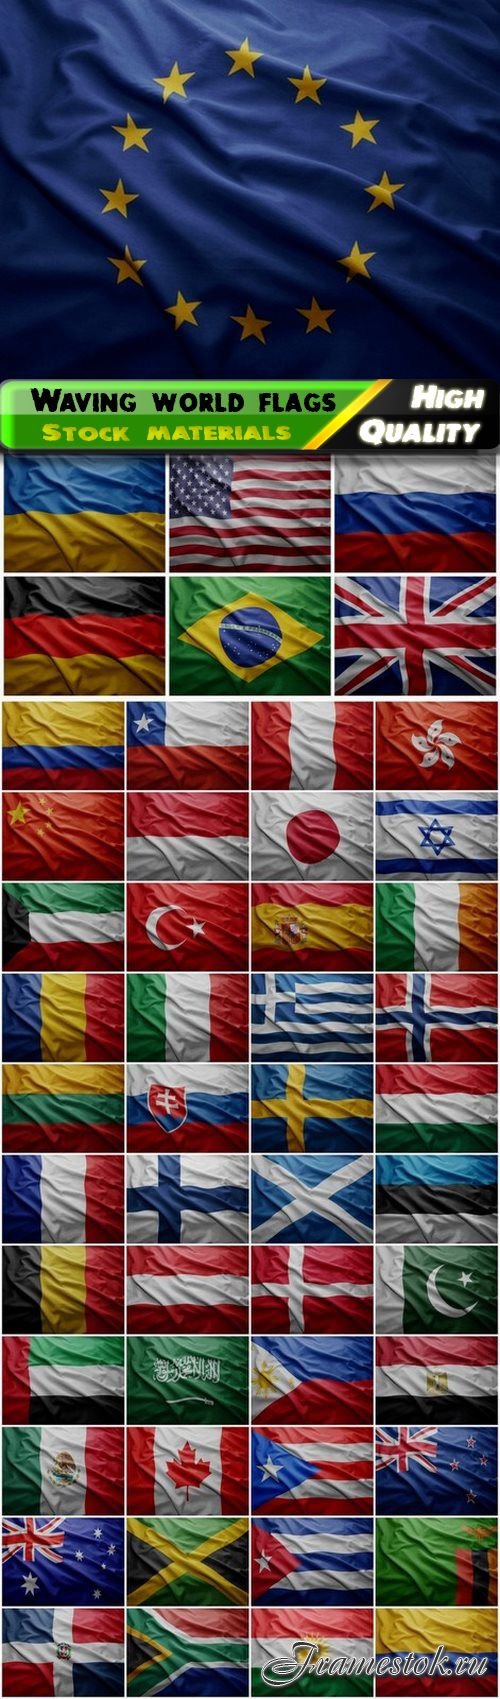 Realistic waving flag of different world countries - 50 HQ Jpg